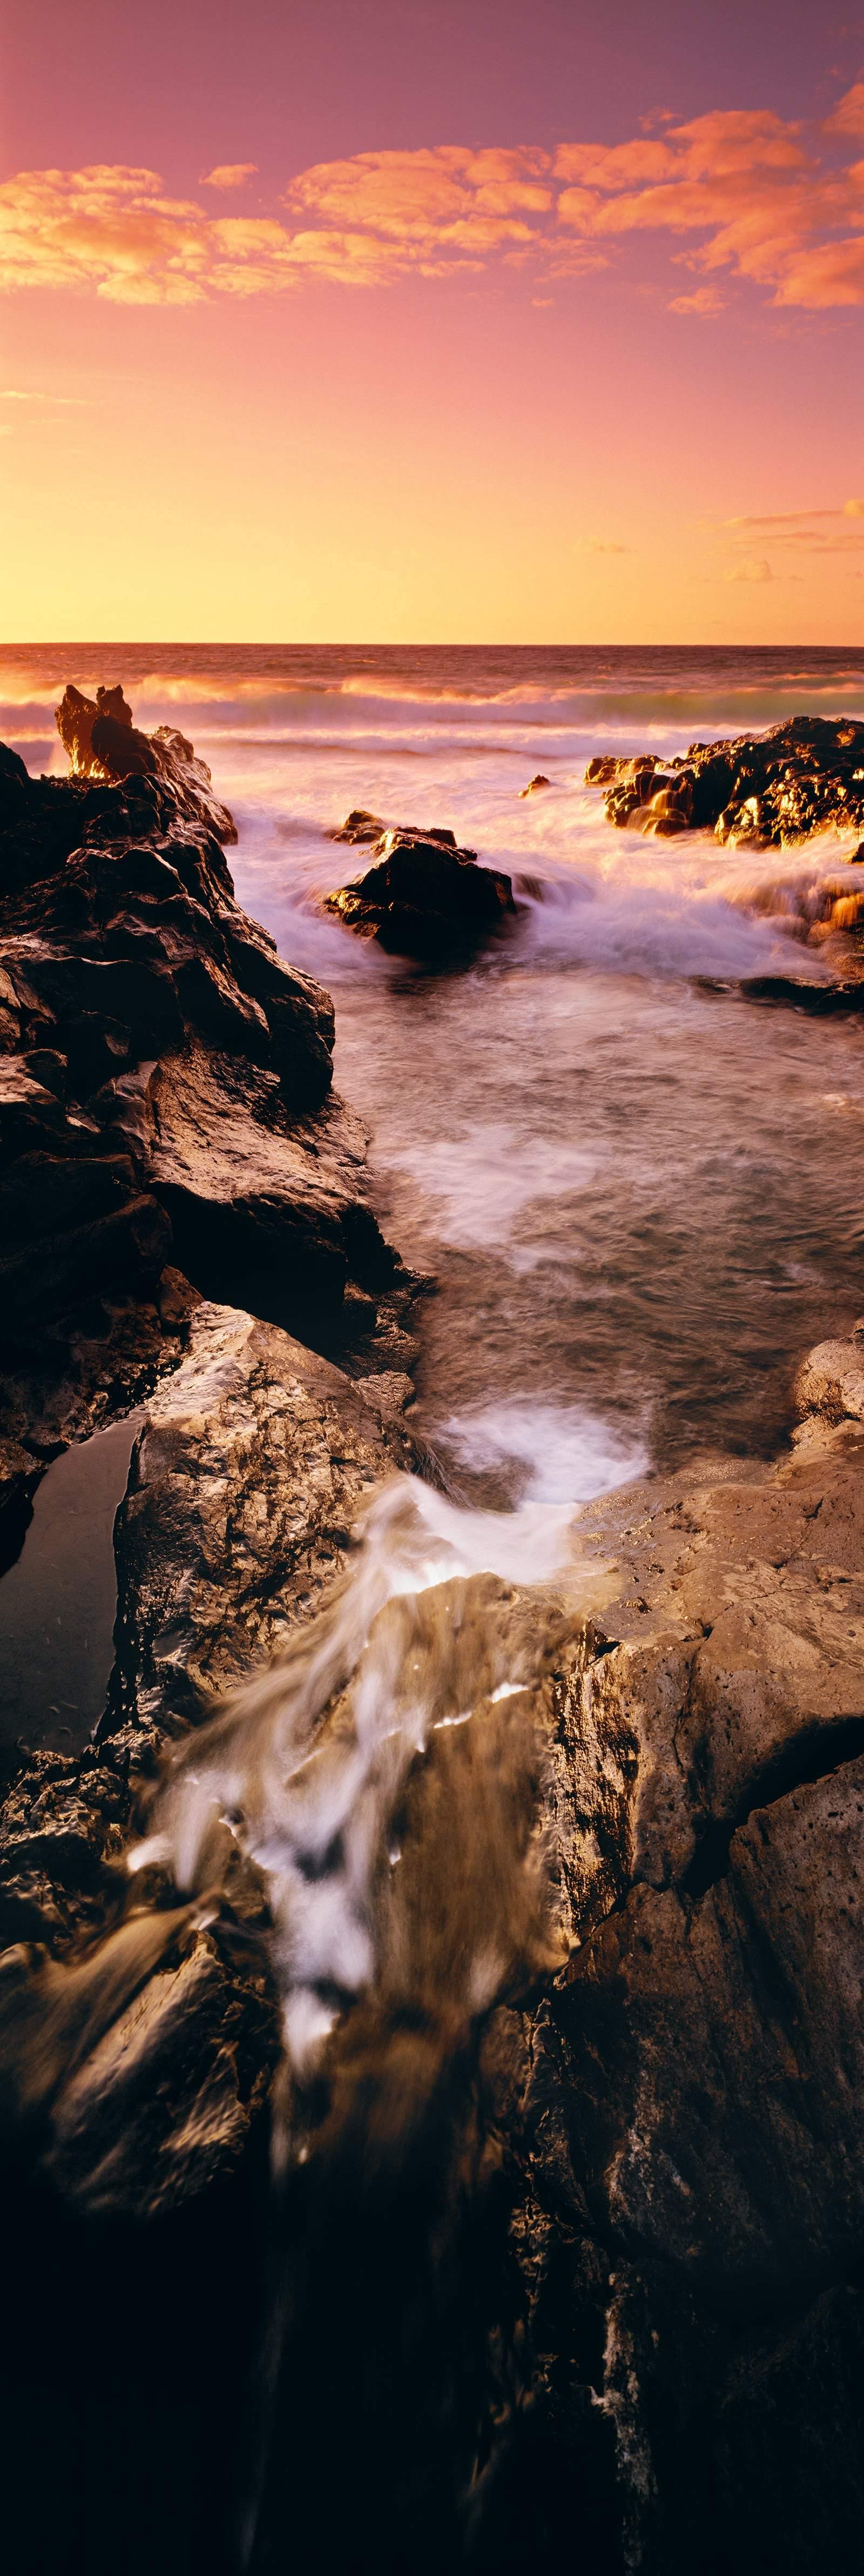 Ocean waves washing over the rocky tidal pools in Hana Hawaii at sunset